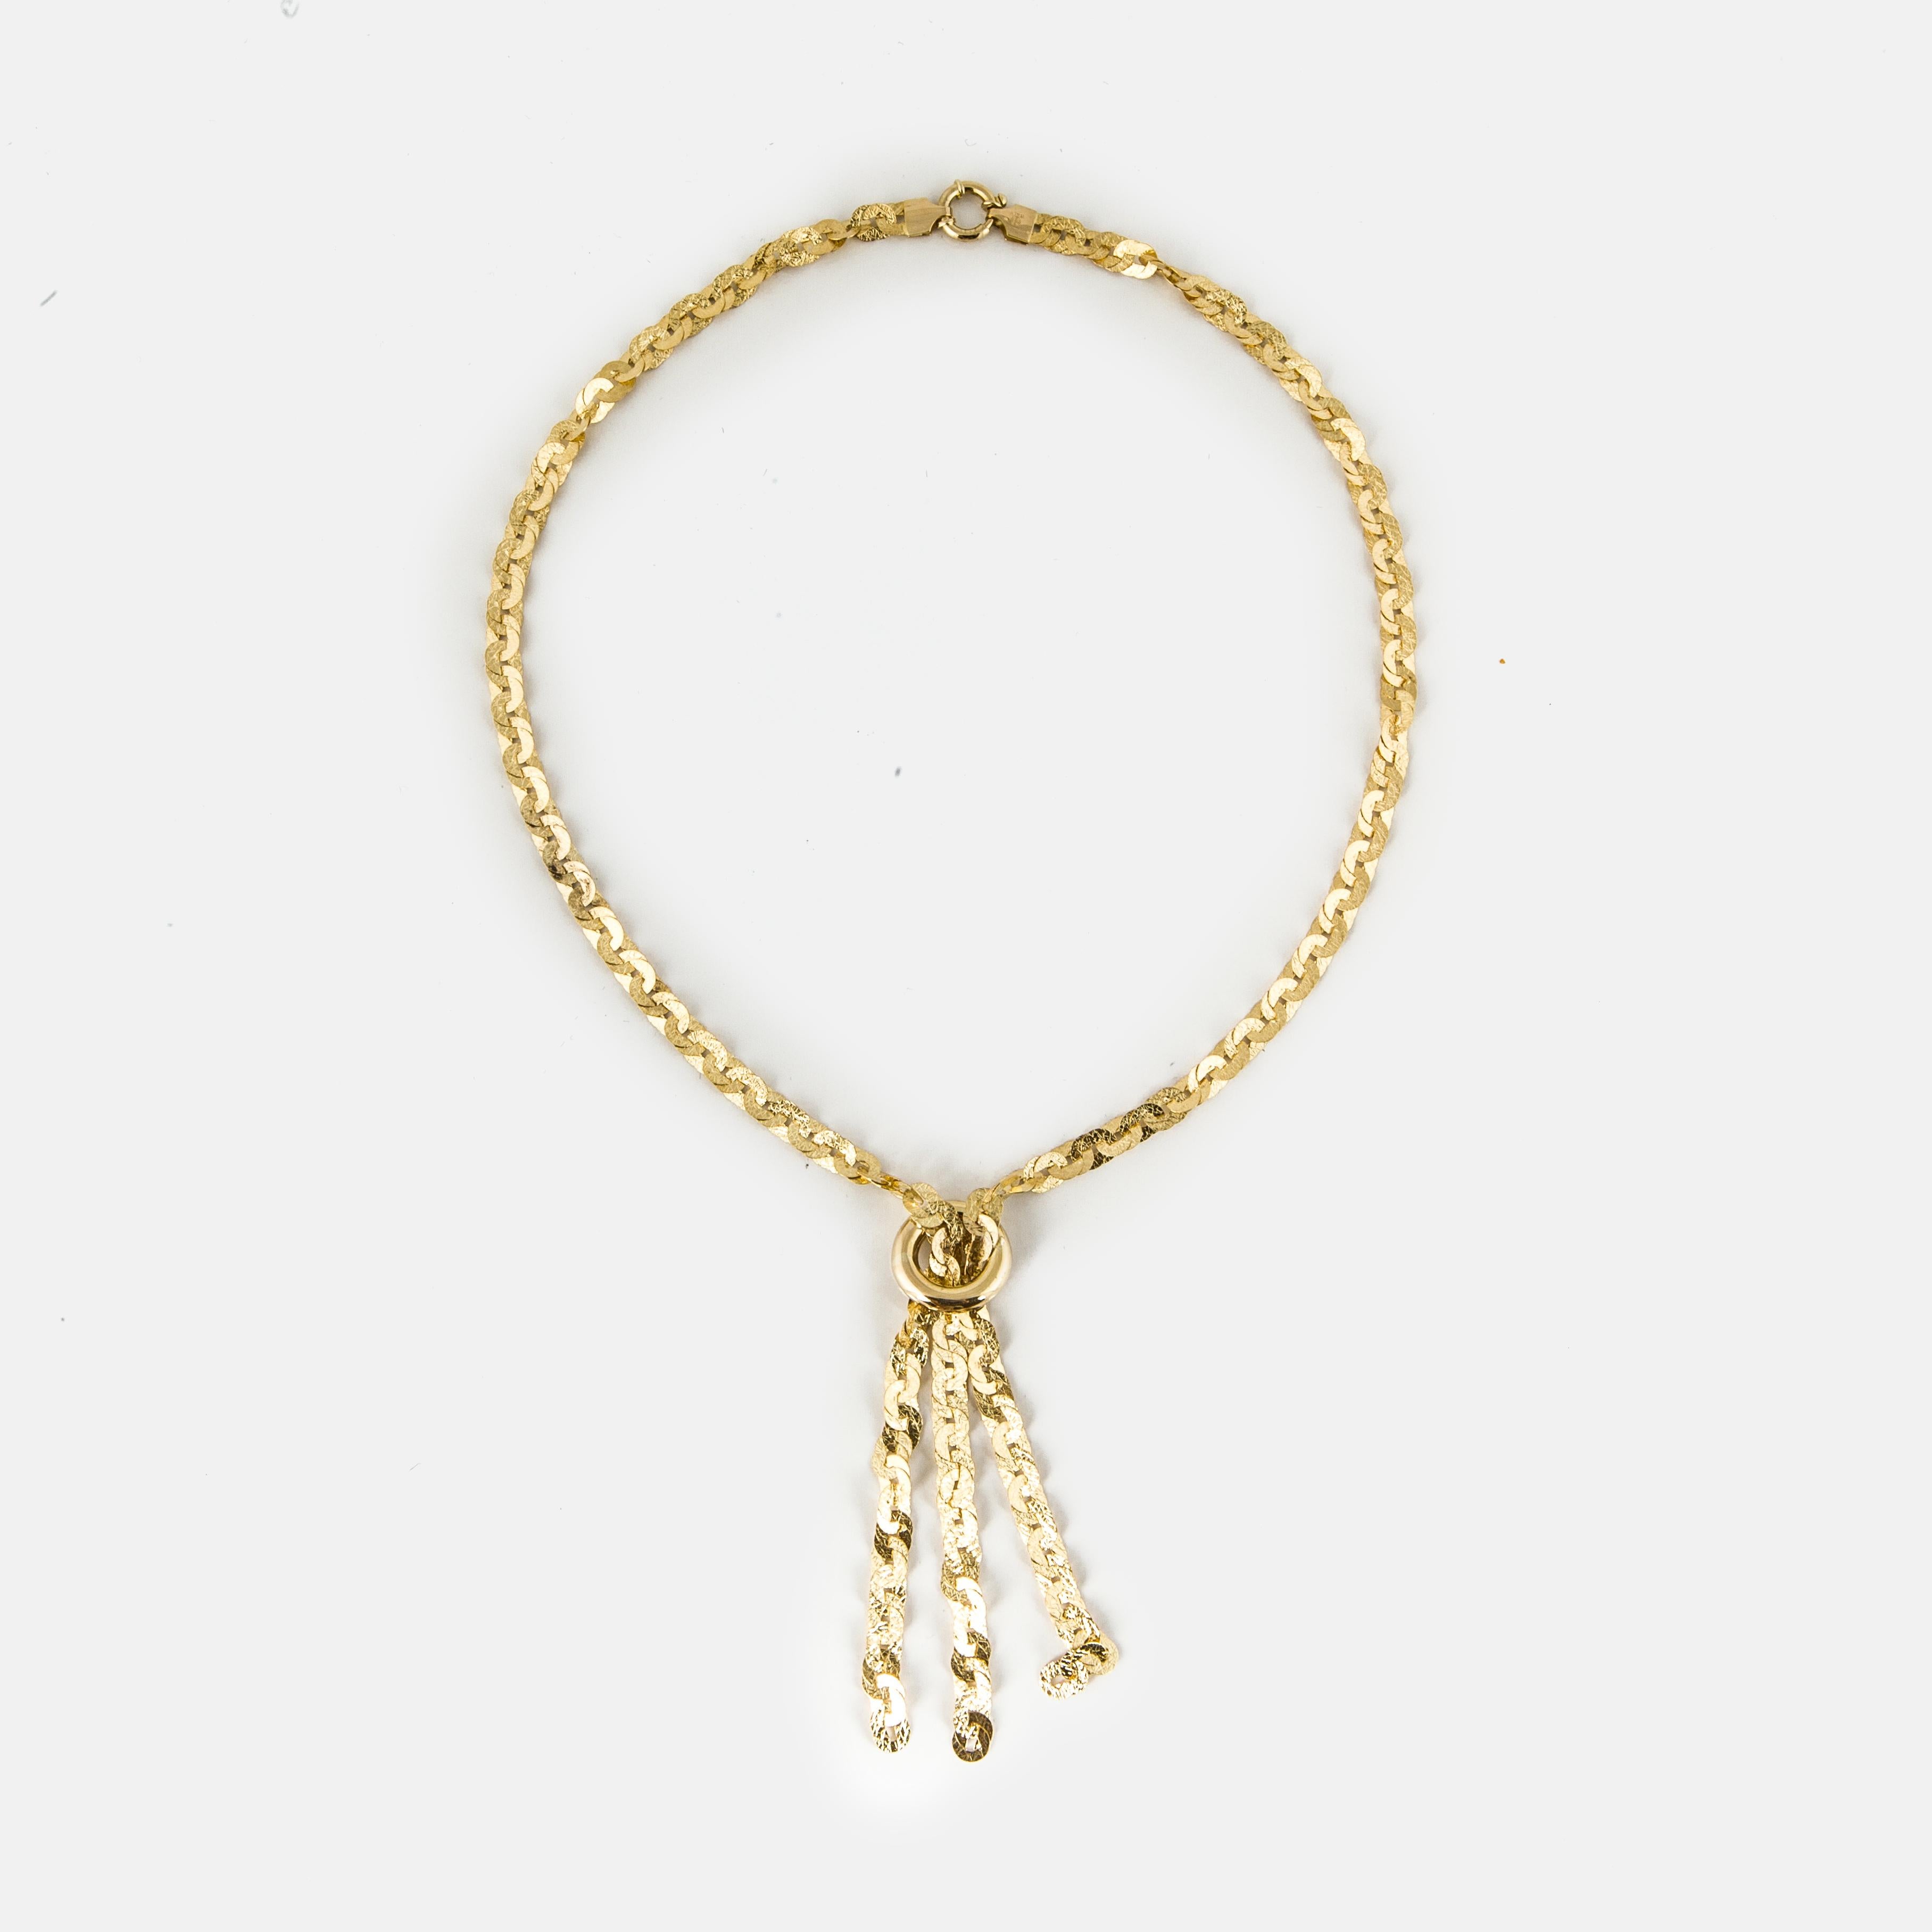 18K yellow gold link necklace with a tassel.  The links are small ovals of gold and are engraved.  Hanging from the bottom is a tassel made of the same chain.  Necklace measures 17